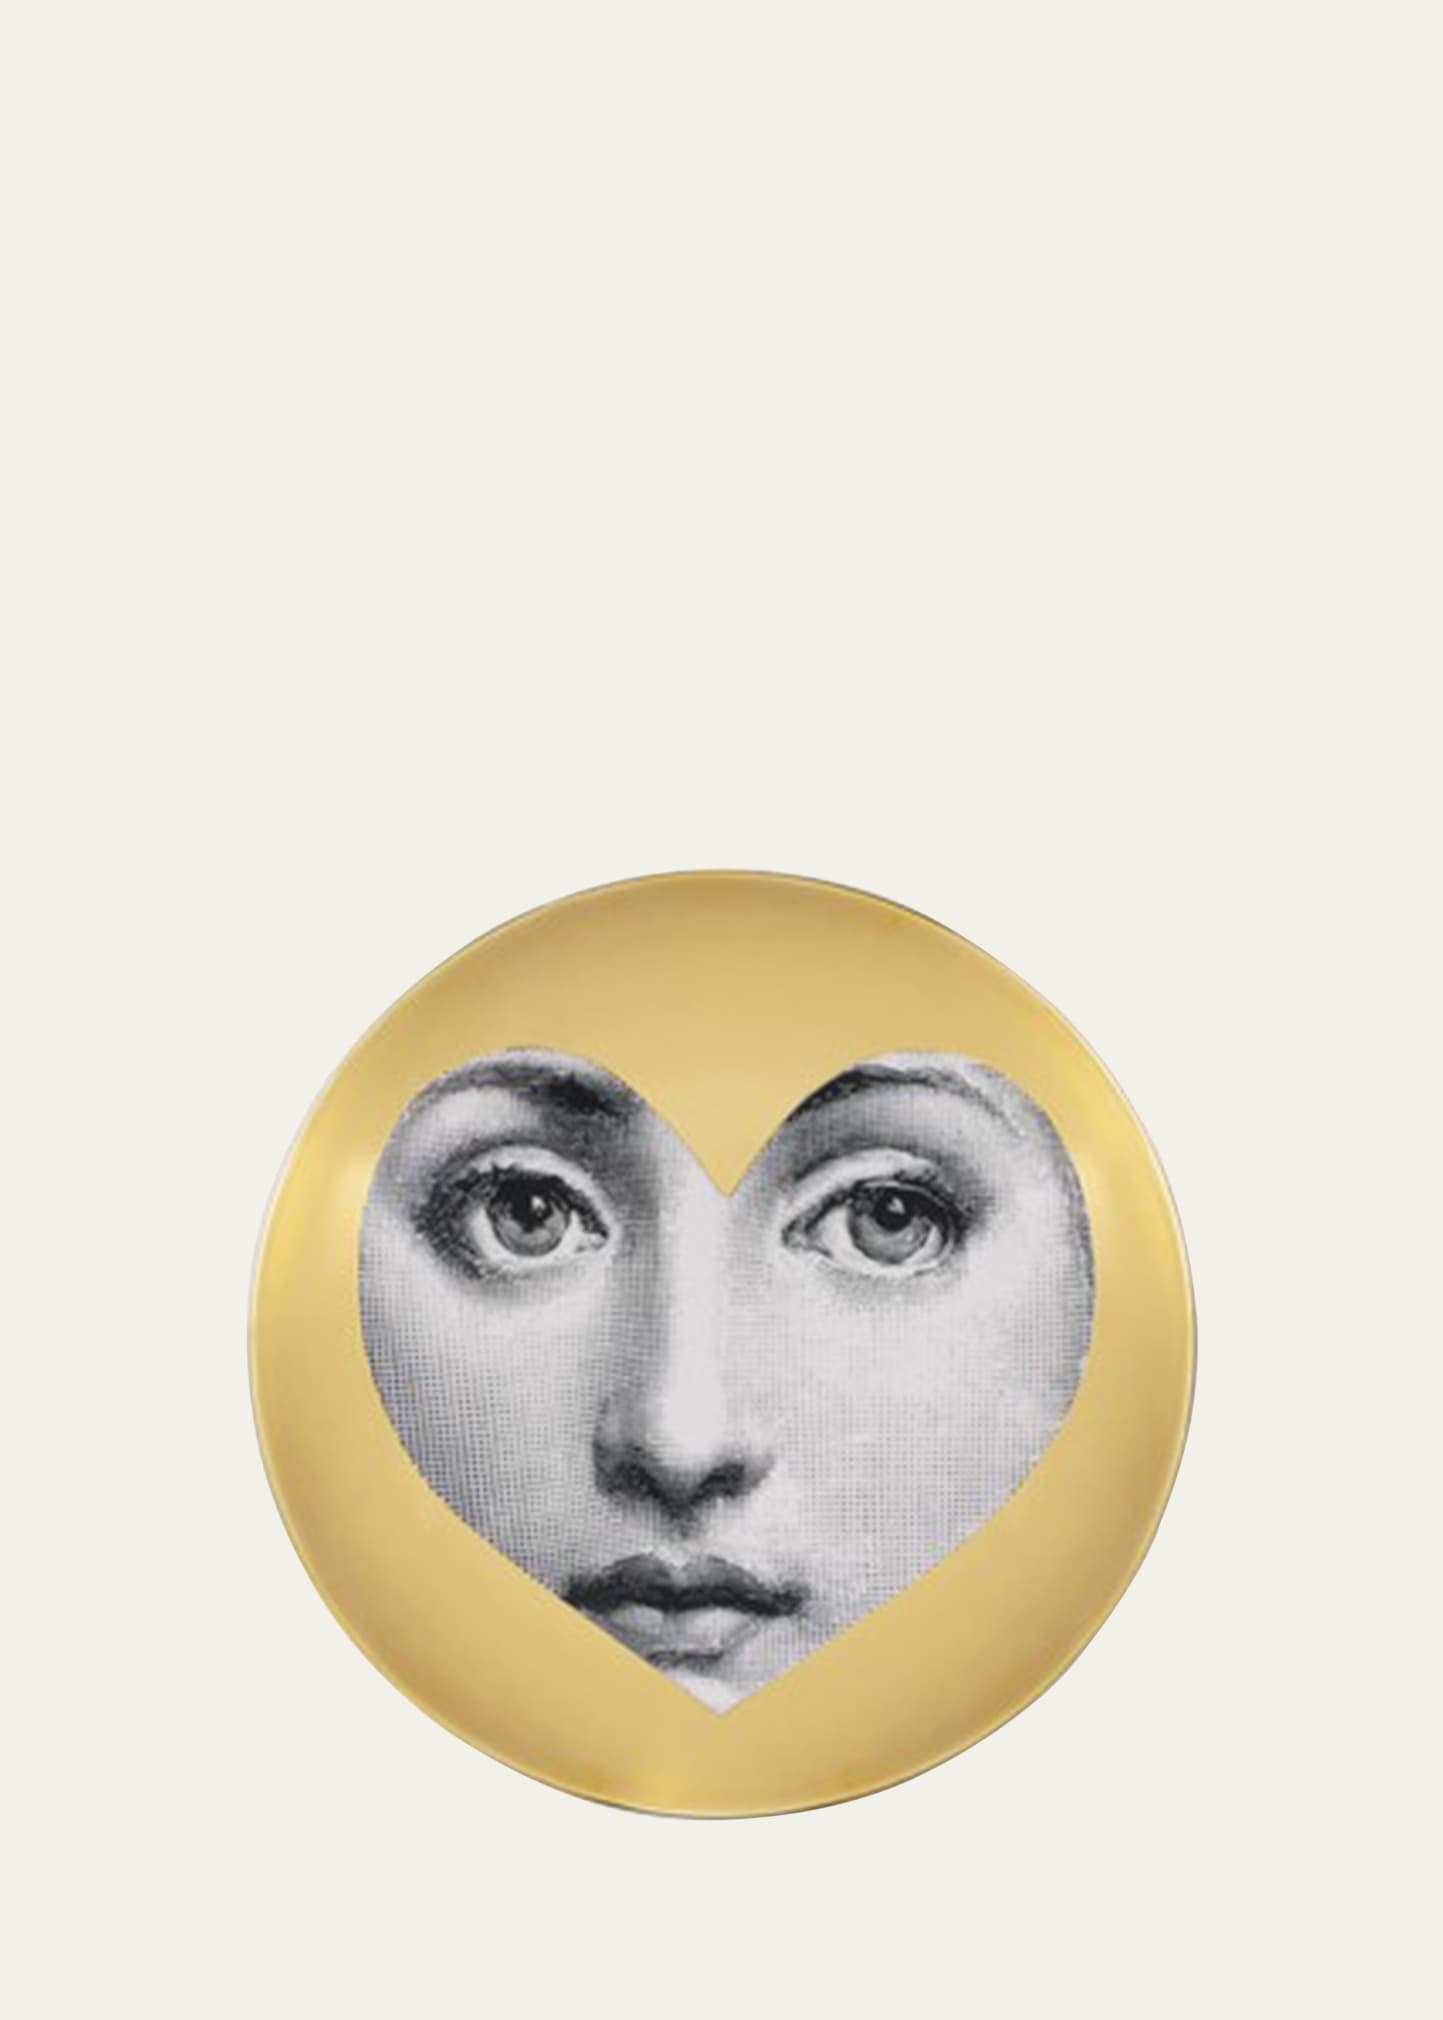 FORNASETTI TEMA E VARIAZIONI N. 41 FACE INSIDE OF HEART GOLD WALL PLATE